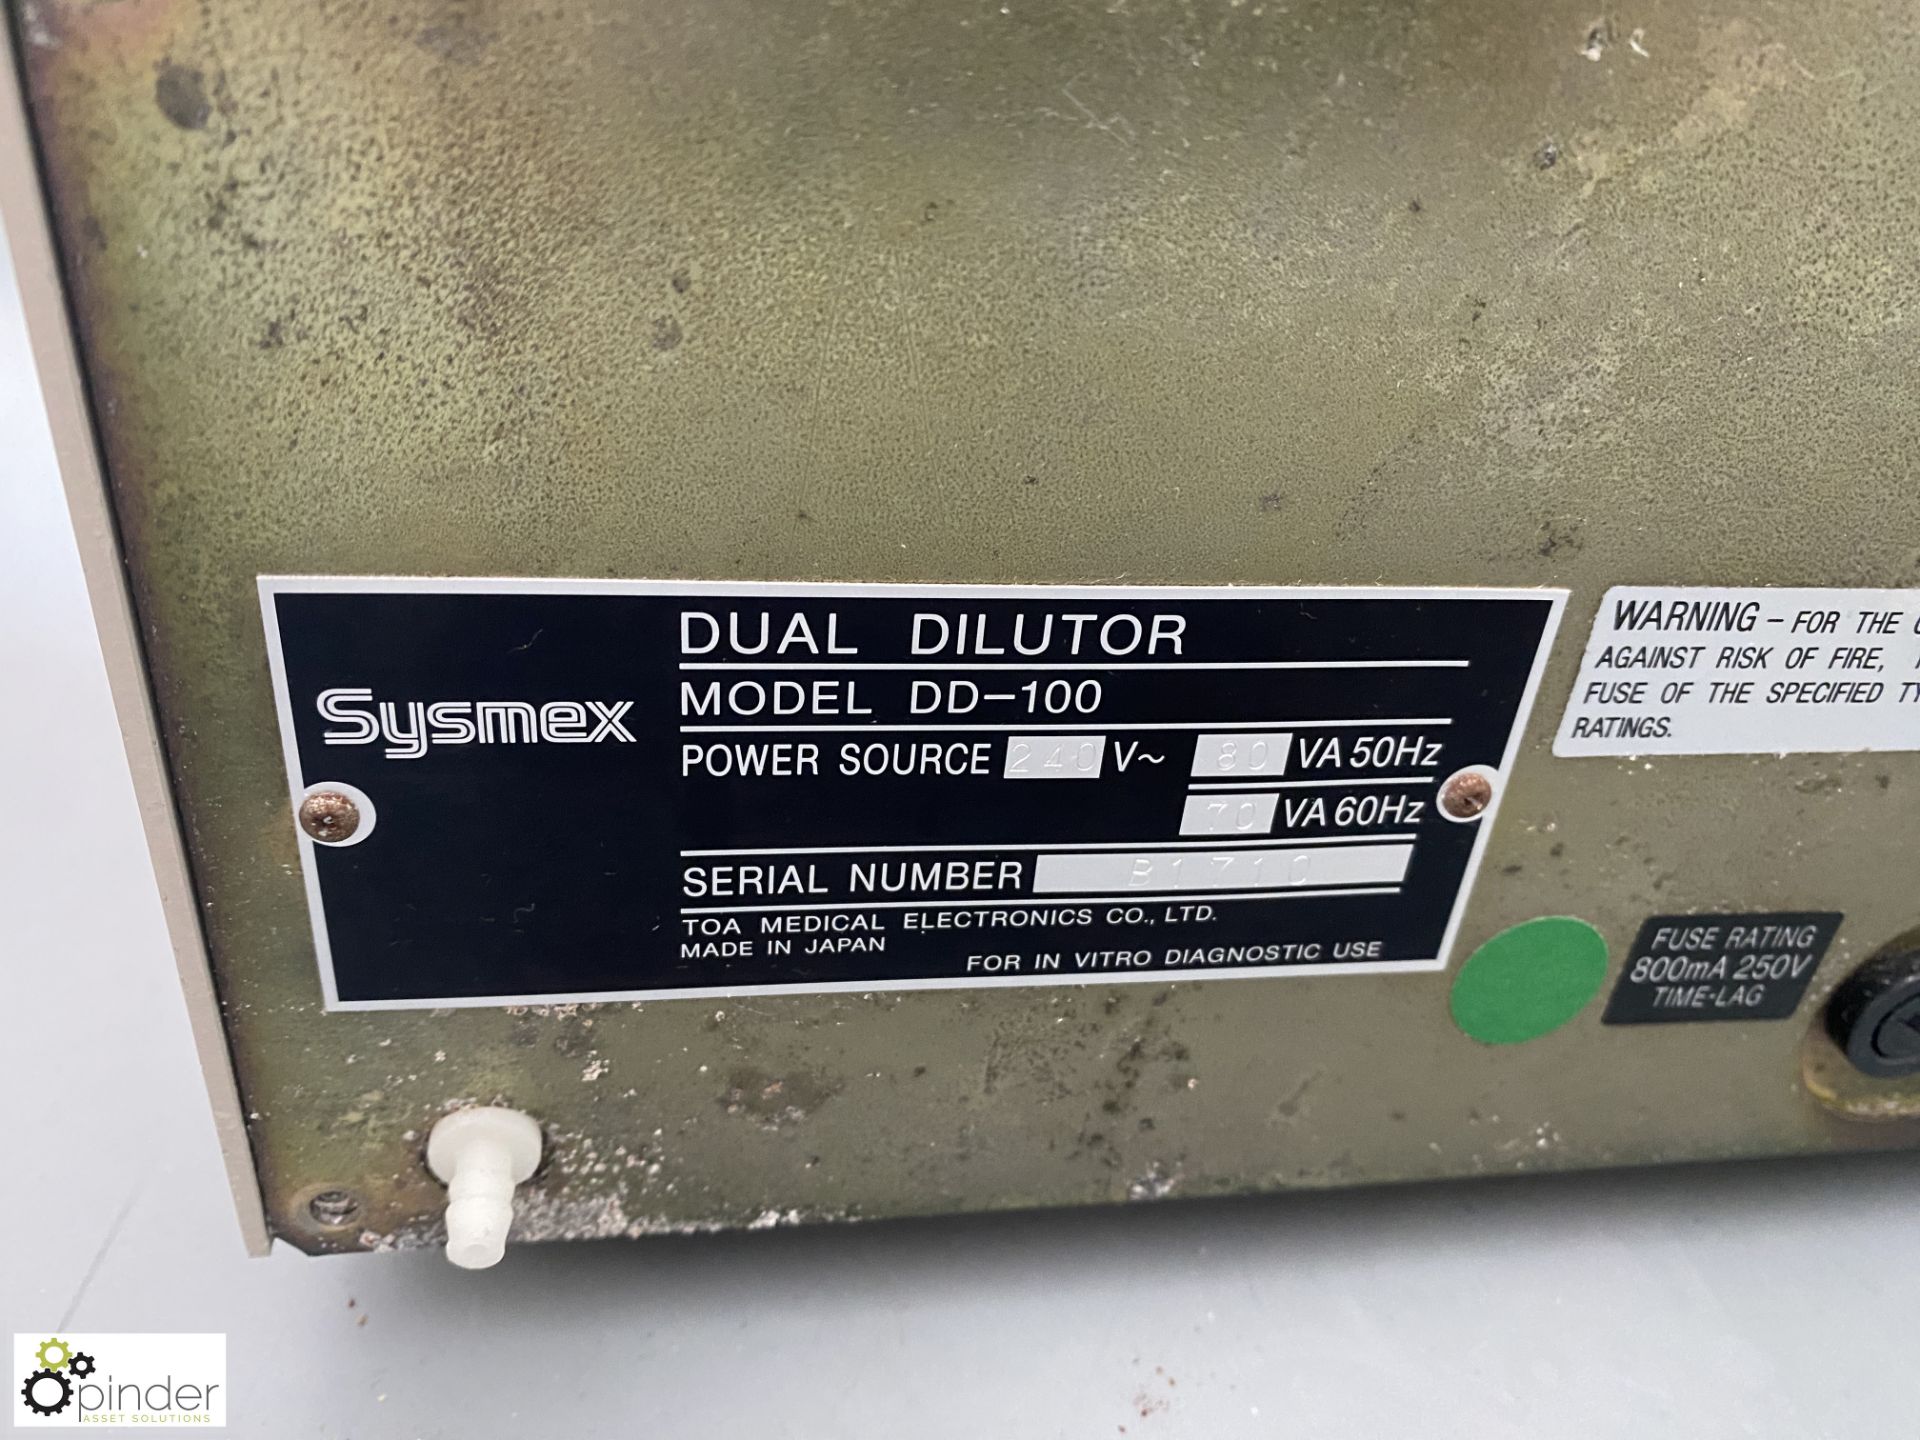 Sysmex DD-100 Blood Dilutor, 240volts, serial number B1710 - Image 3 of 4